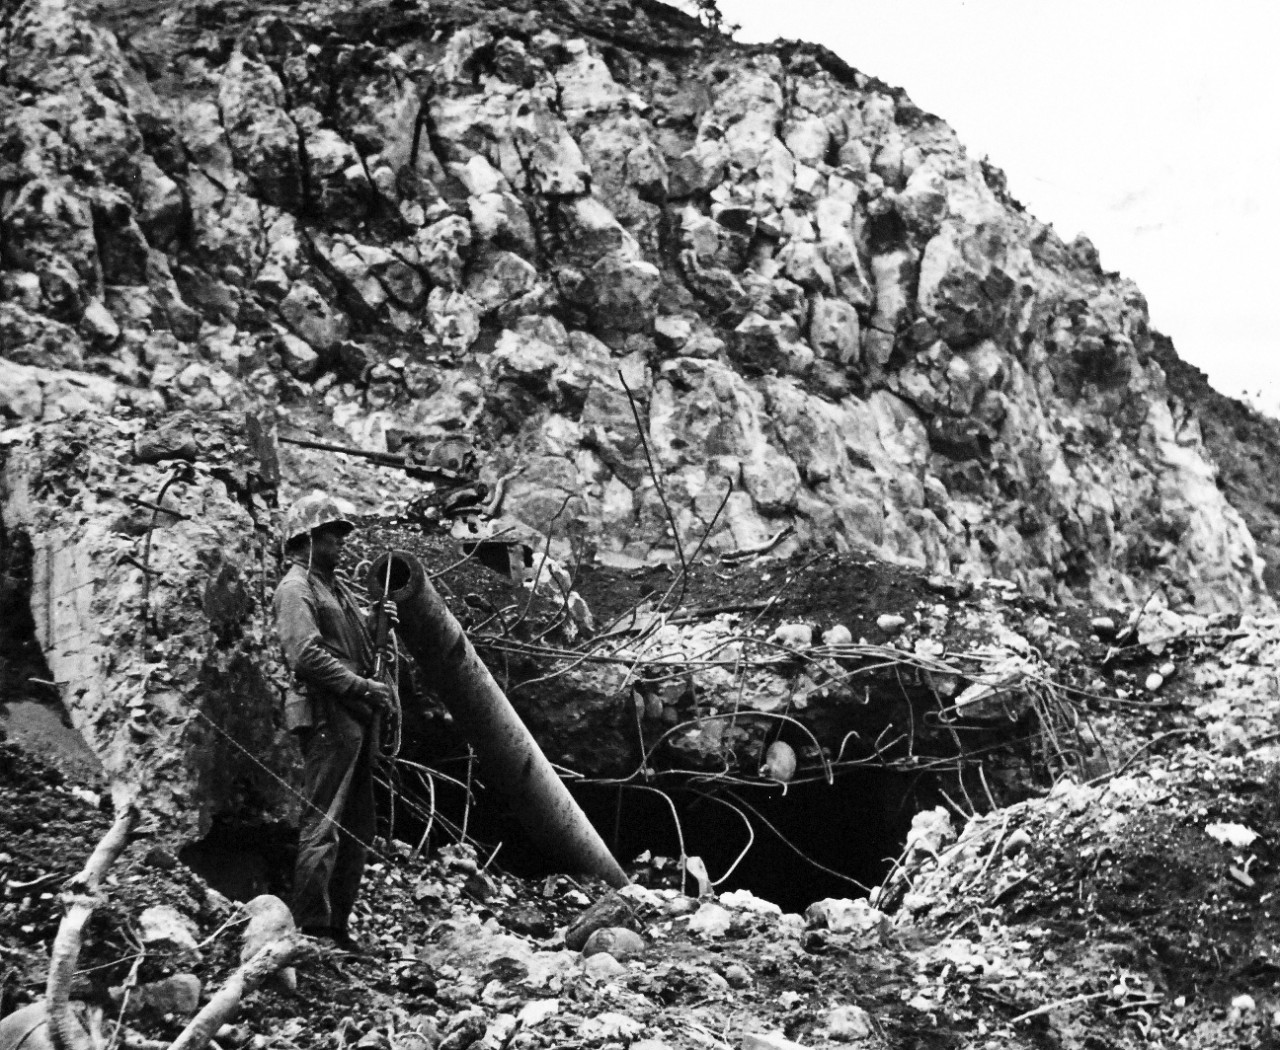 80-G-304846:  Battle for Iwo Jima, February-March 1945. A wave of Fourth Division Marines beginning an attack from the beach at Iwo Jima.  The rugged cliff above made this mighty Japanese emplacement at the foot of Mount Suribachi almost completely impregnable.  This photograph of the wrecked gun was taken on the fifth day of the Iwo Jima struggle.   Photograph released February 24, 1945.  Official U.S. Navy Photograph now in the collections of the National Archives.  (2016/01/19).